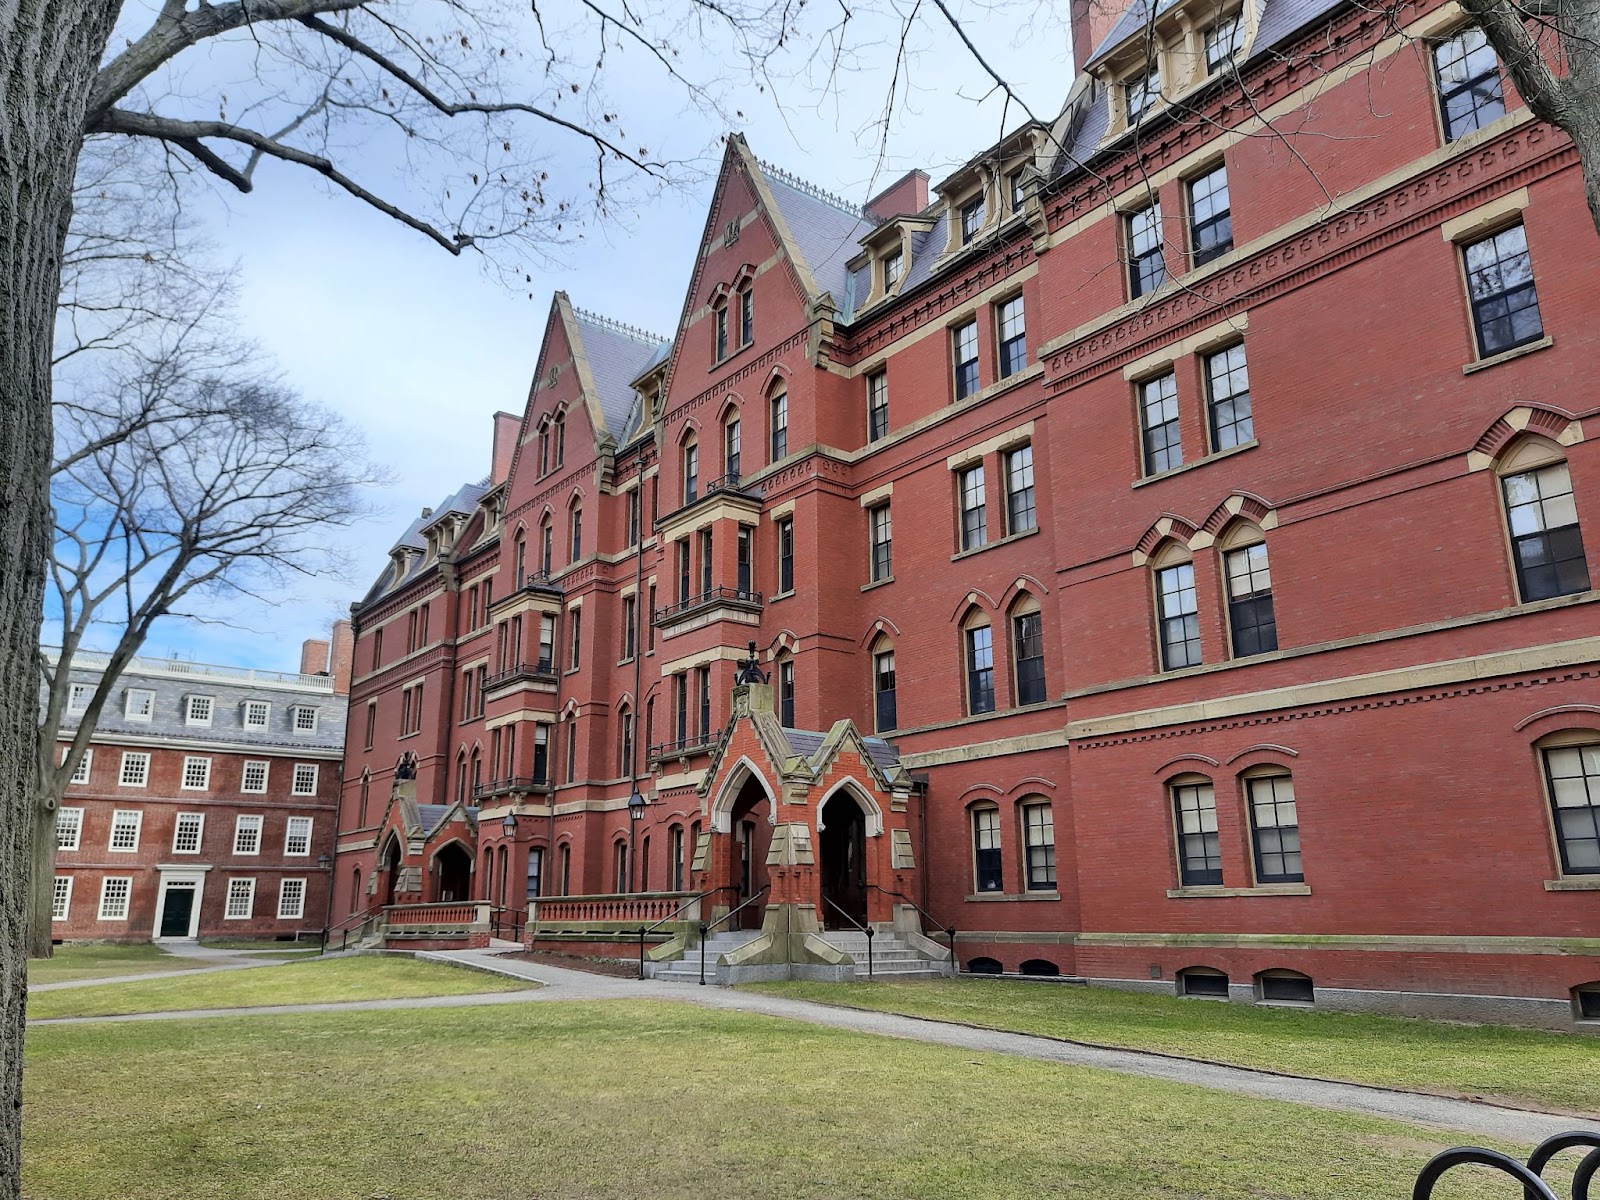 What Are the Ivy League Schools?